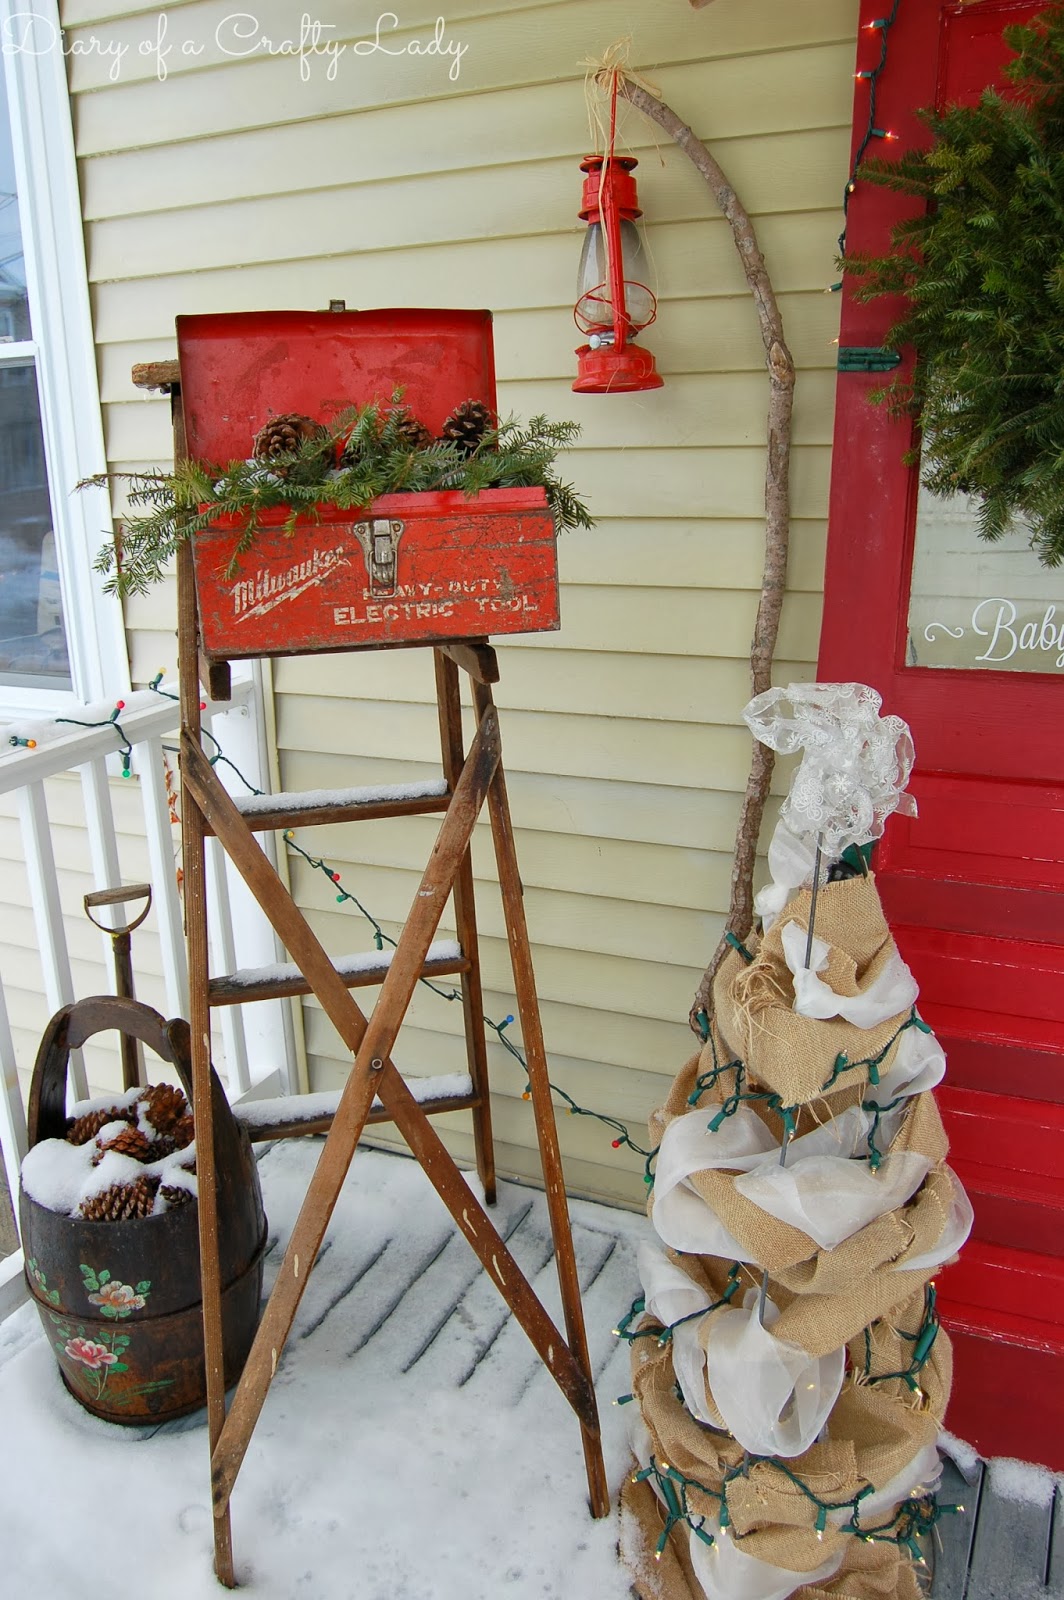 Diary of a Crafty Lady: My Christmas Porch